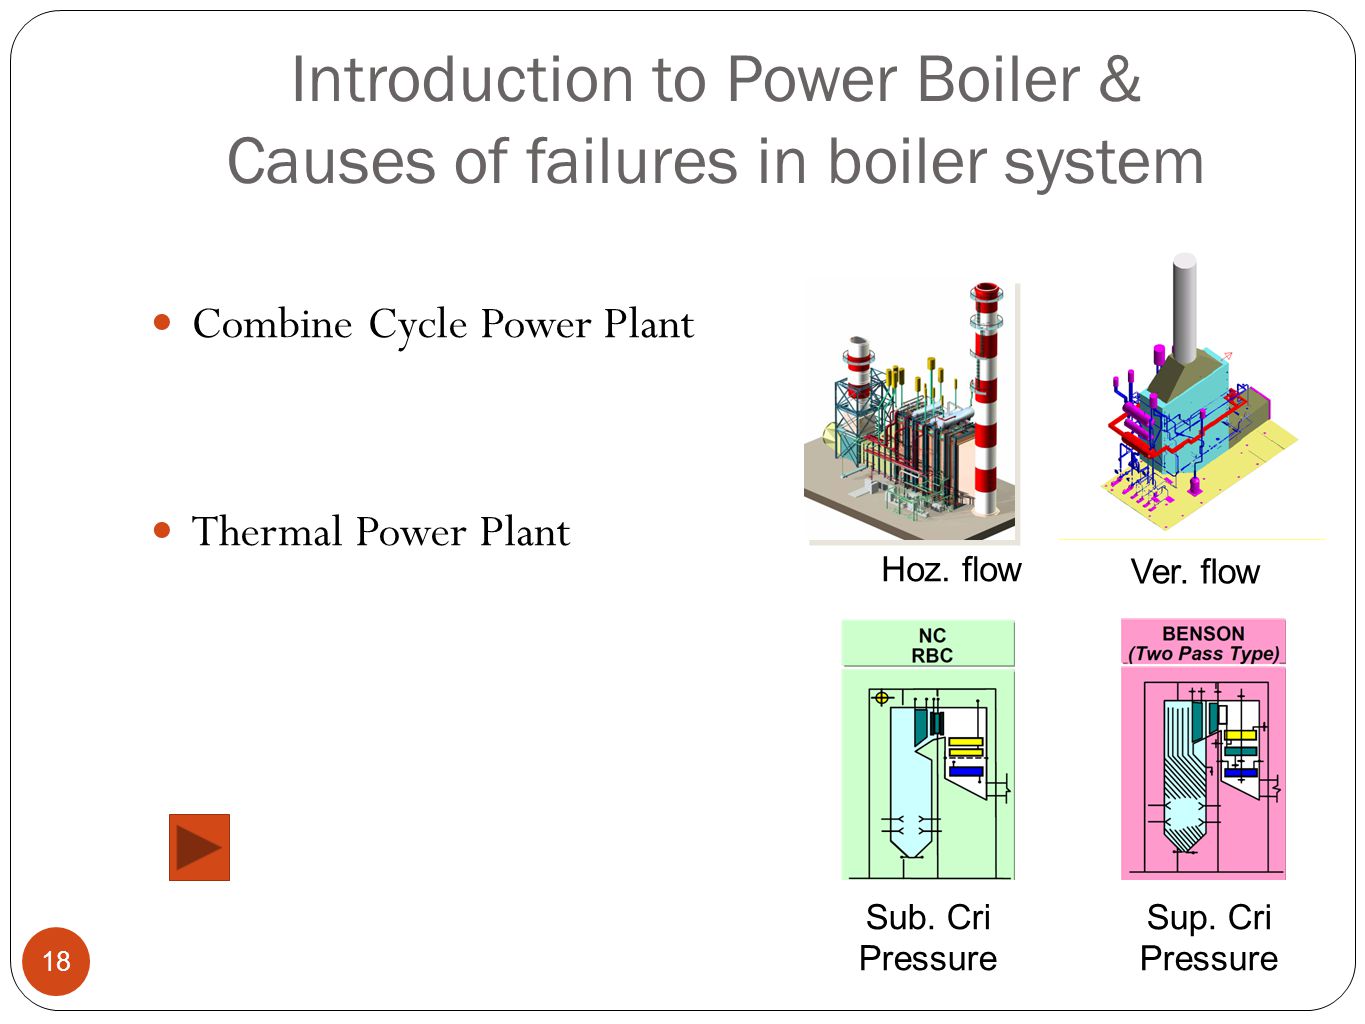 Introduction to Power Boiler & Causes of failures in boiler system